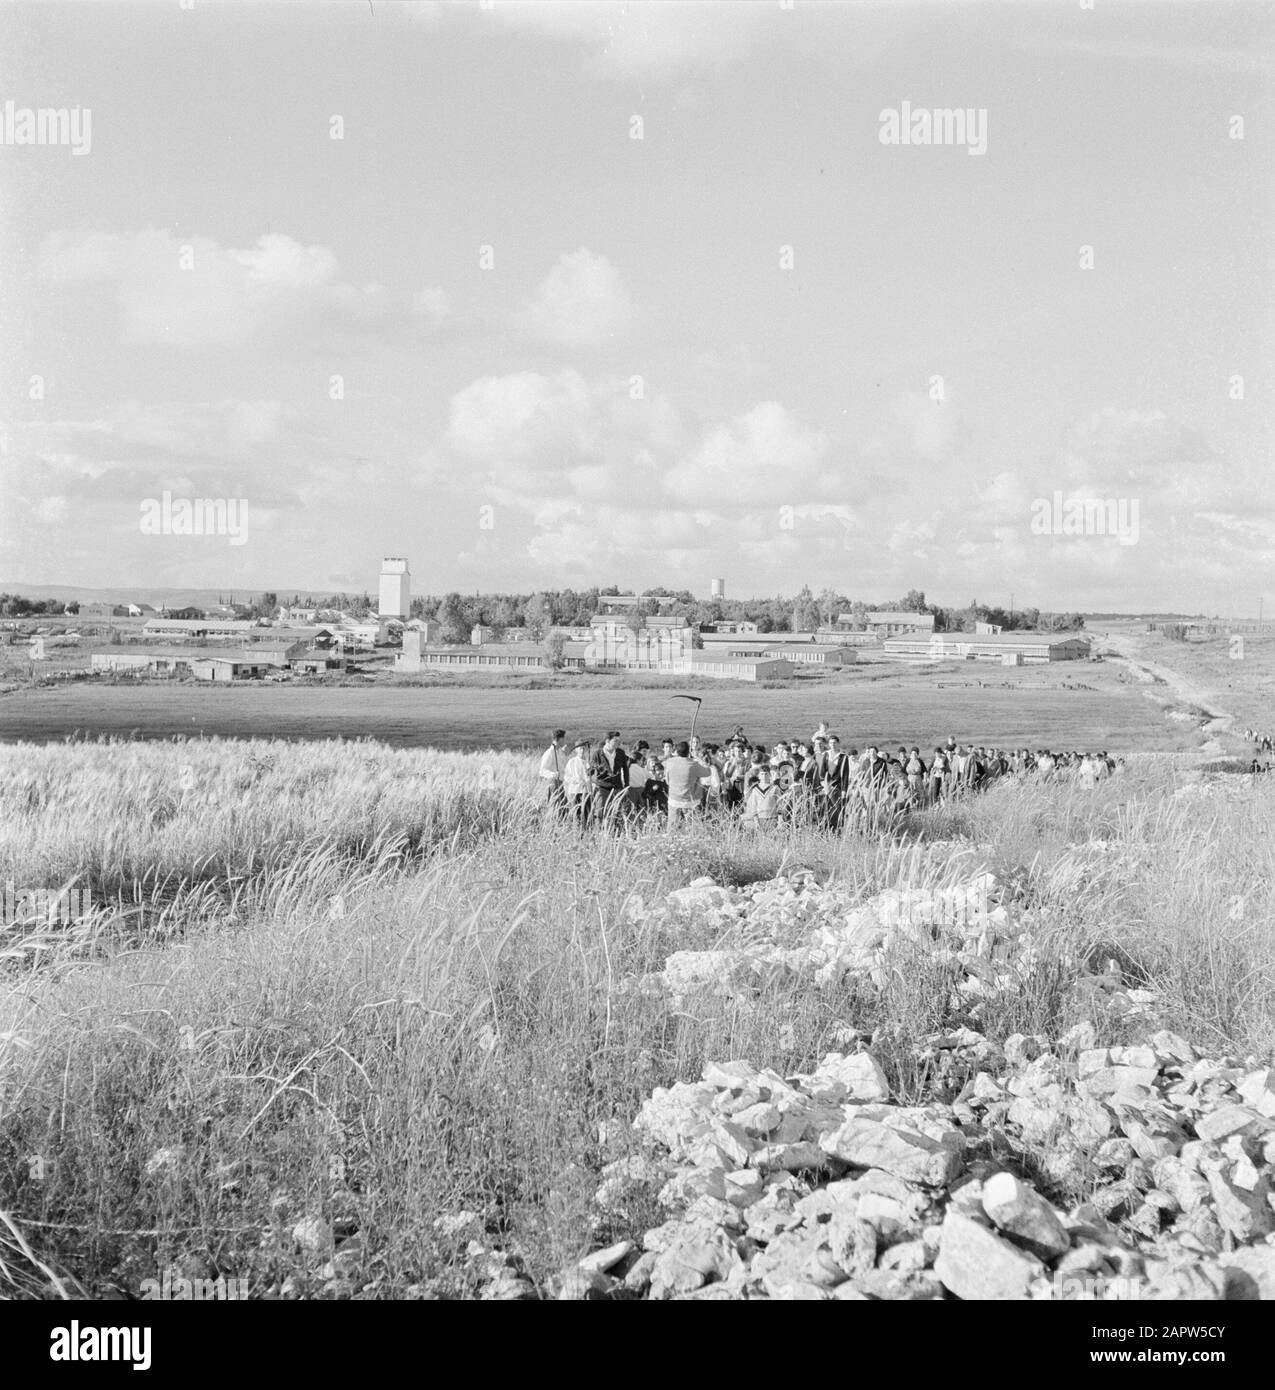 Israel 1964-1965. Gal'ed  Kibbutz Gal'ed. Panorama with in the foreground a field with ripening grain. Residents of the kibbutz have gathered for the first cut of the grain on the day preceding the Jewish Easter feast - pesach Annotation: Gal'ed (also called Even Yitzhak) is a kibbutz in northern Israel, located in the plain of Menasse. Date: January 1, 1960 Location: Gal'ed, Israel Keywords: fields, cereals, Jewish religion, kibbutz, harvest festivals Stock Photo